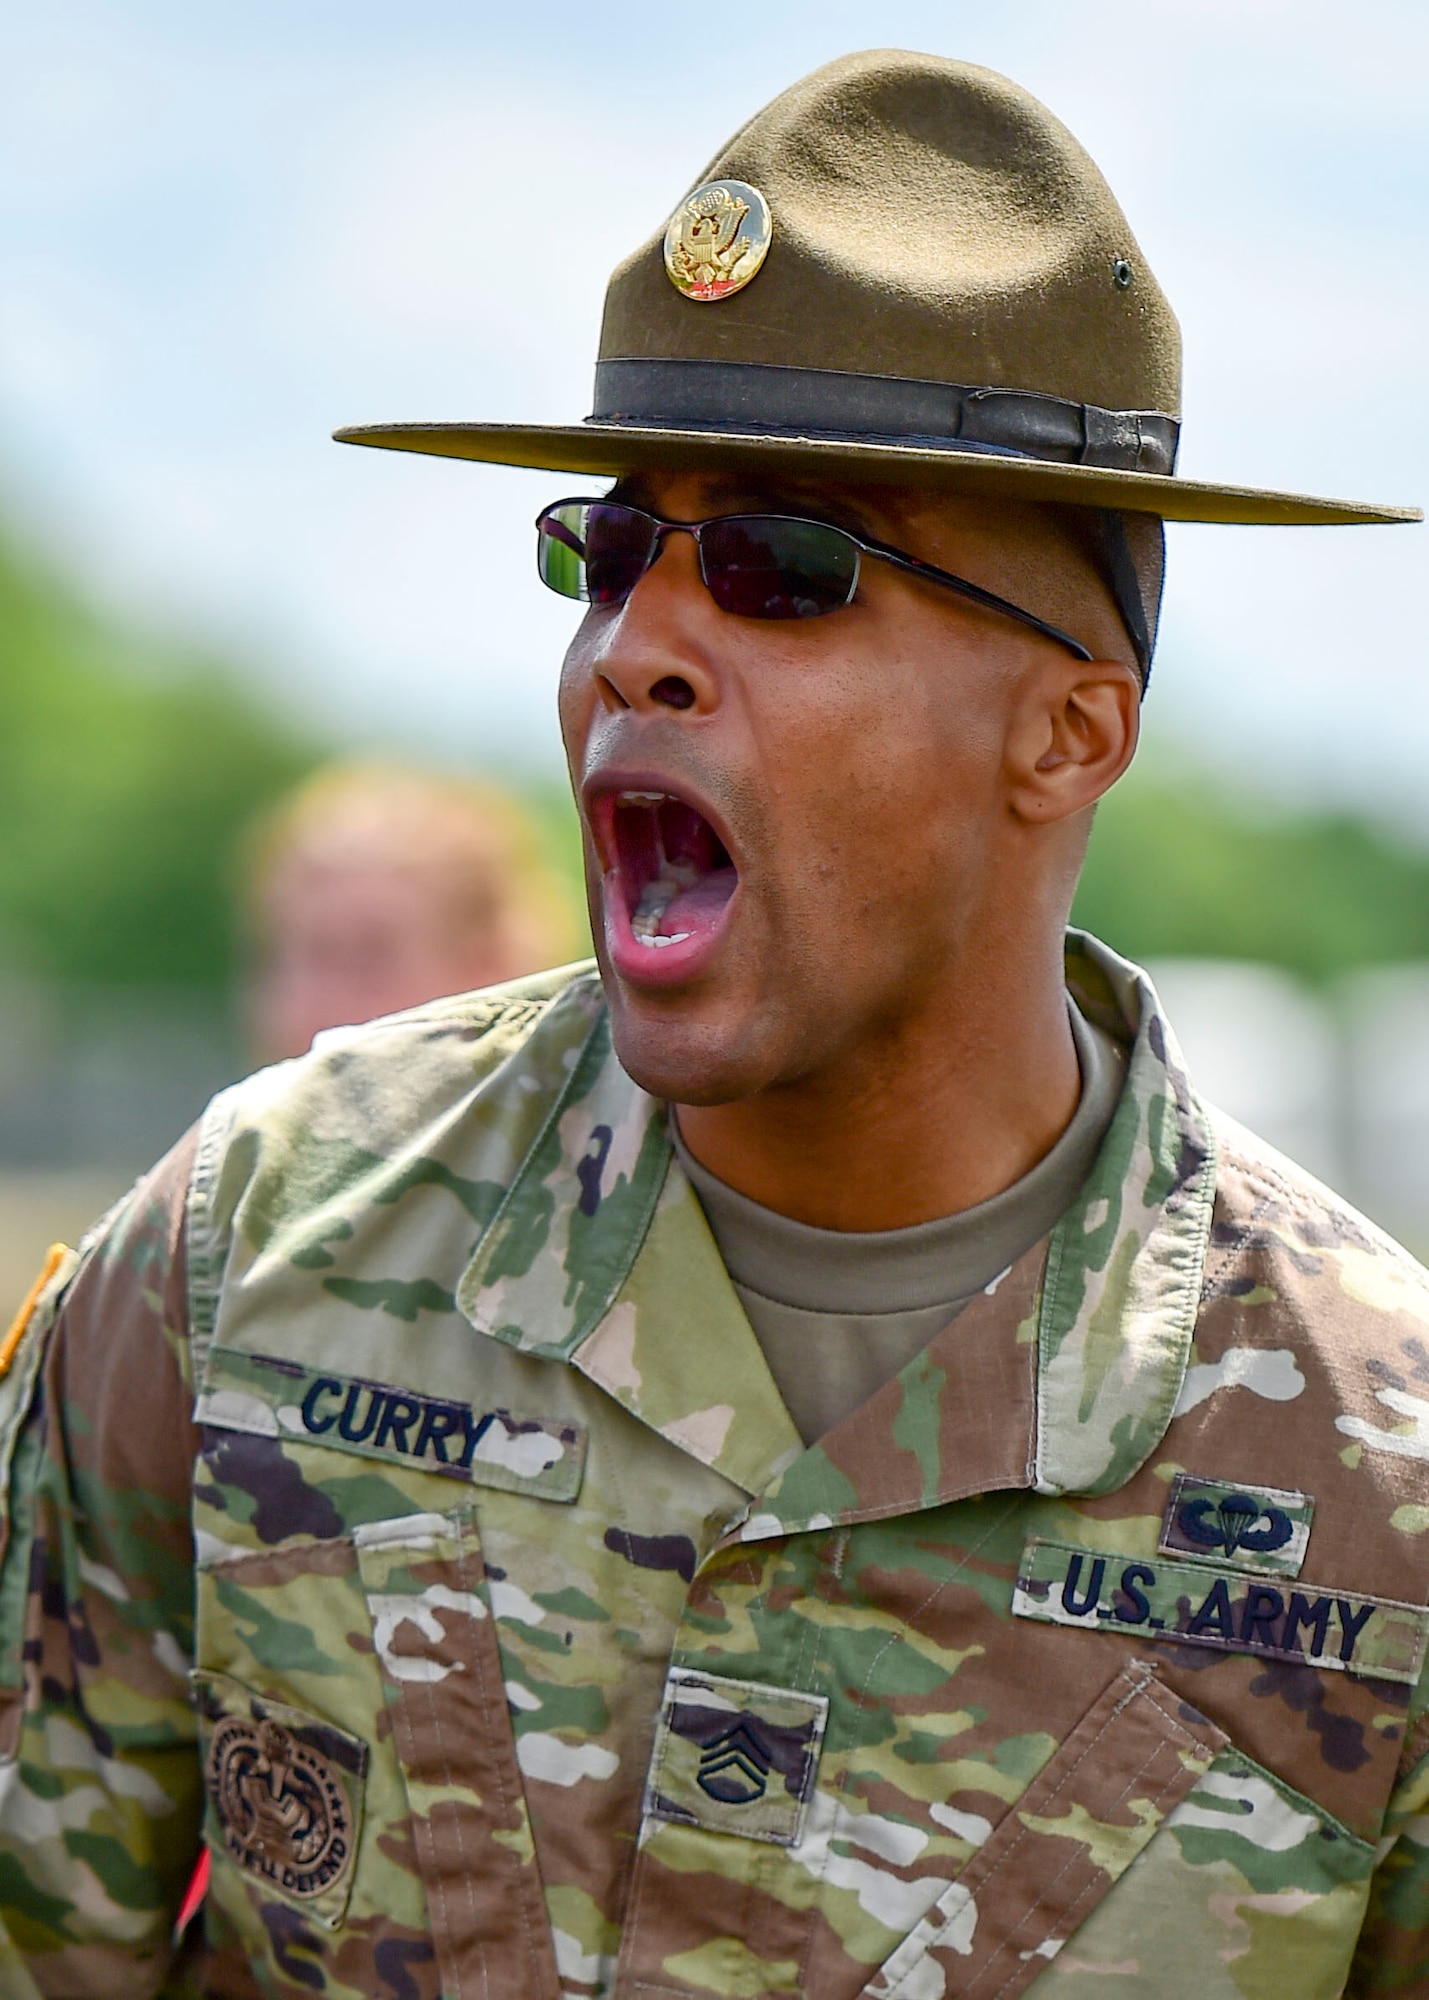 U.S. Army Staff Sgt. Brandon Curry, a drill sergeant with the 1st Bn., 390th Inf. Reg., yells orders to Junior Reserve Officer Training Corps (JROTC) cadets during an encampment here, June 21, 2017.